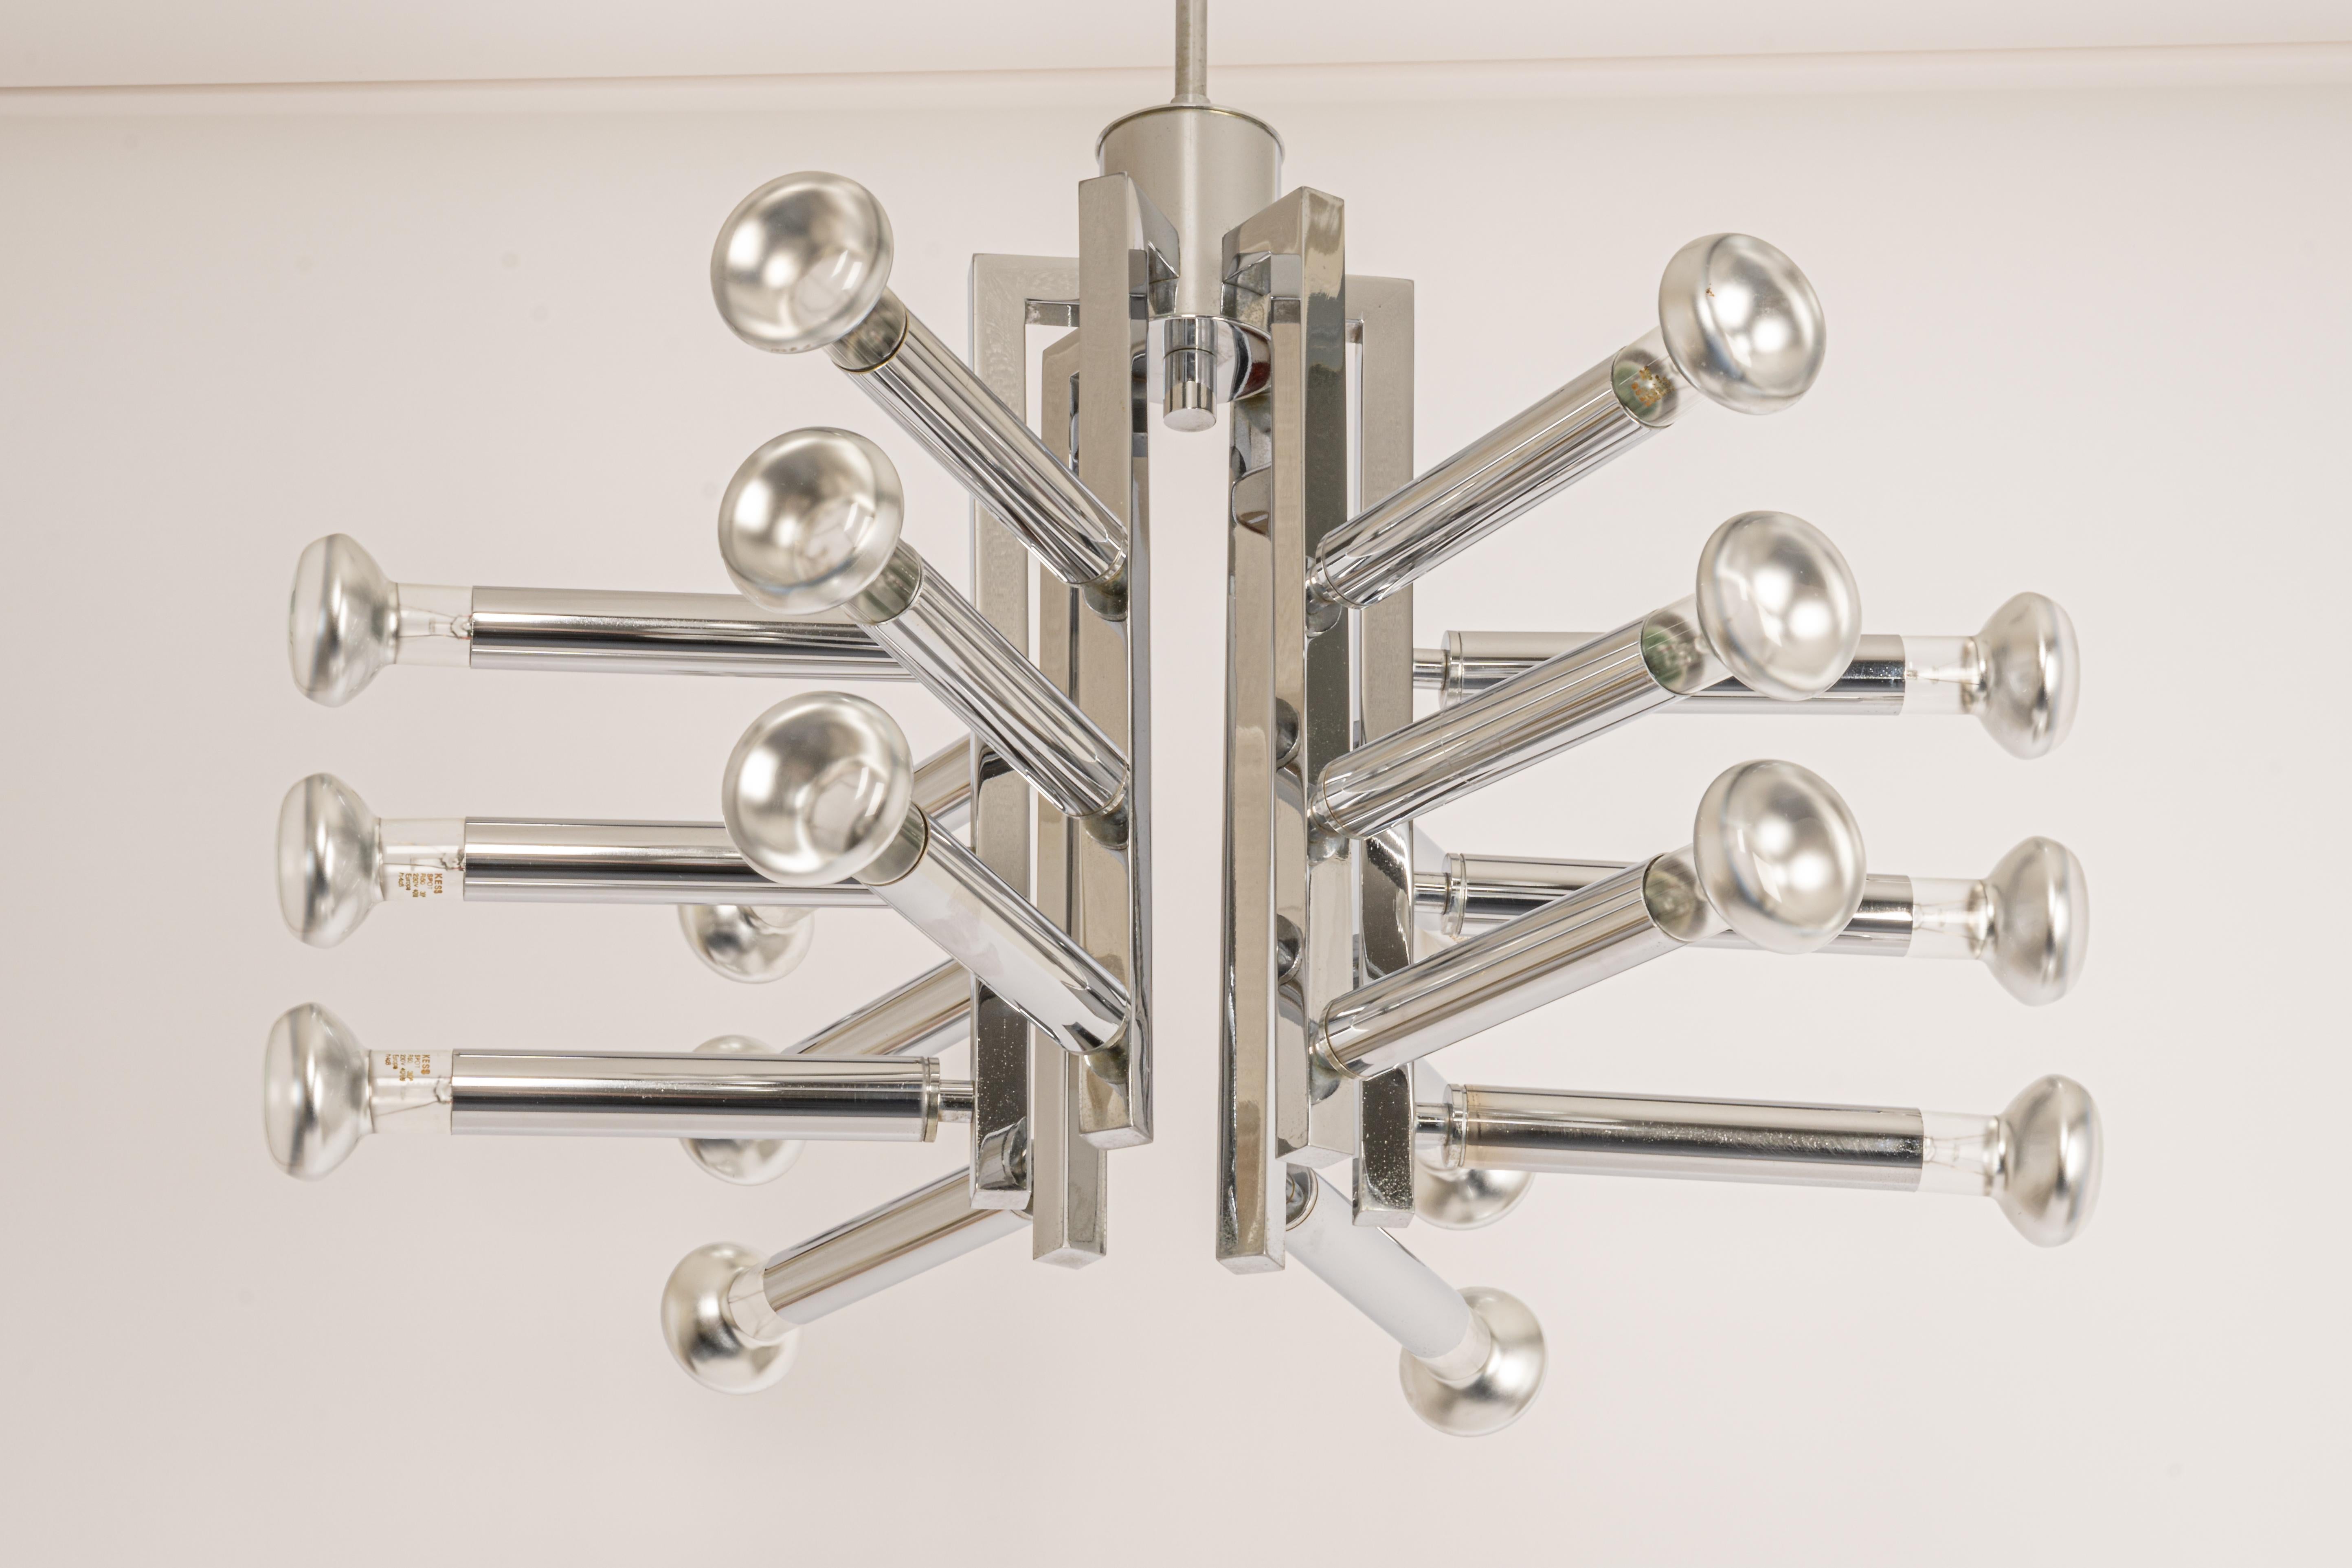 Large Chrome Space Age Sputnik Atomium Chandelier by Cosack, Germany, 1970s For Sale 2